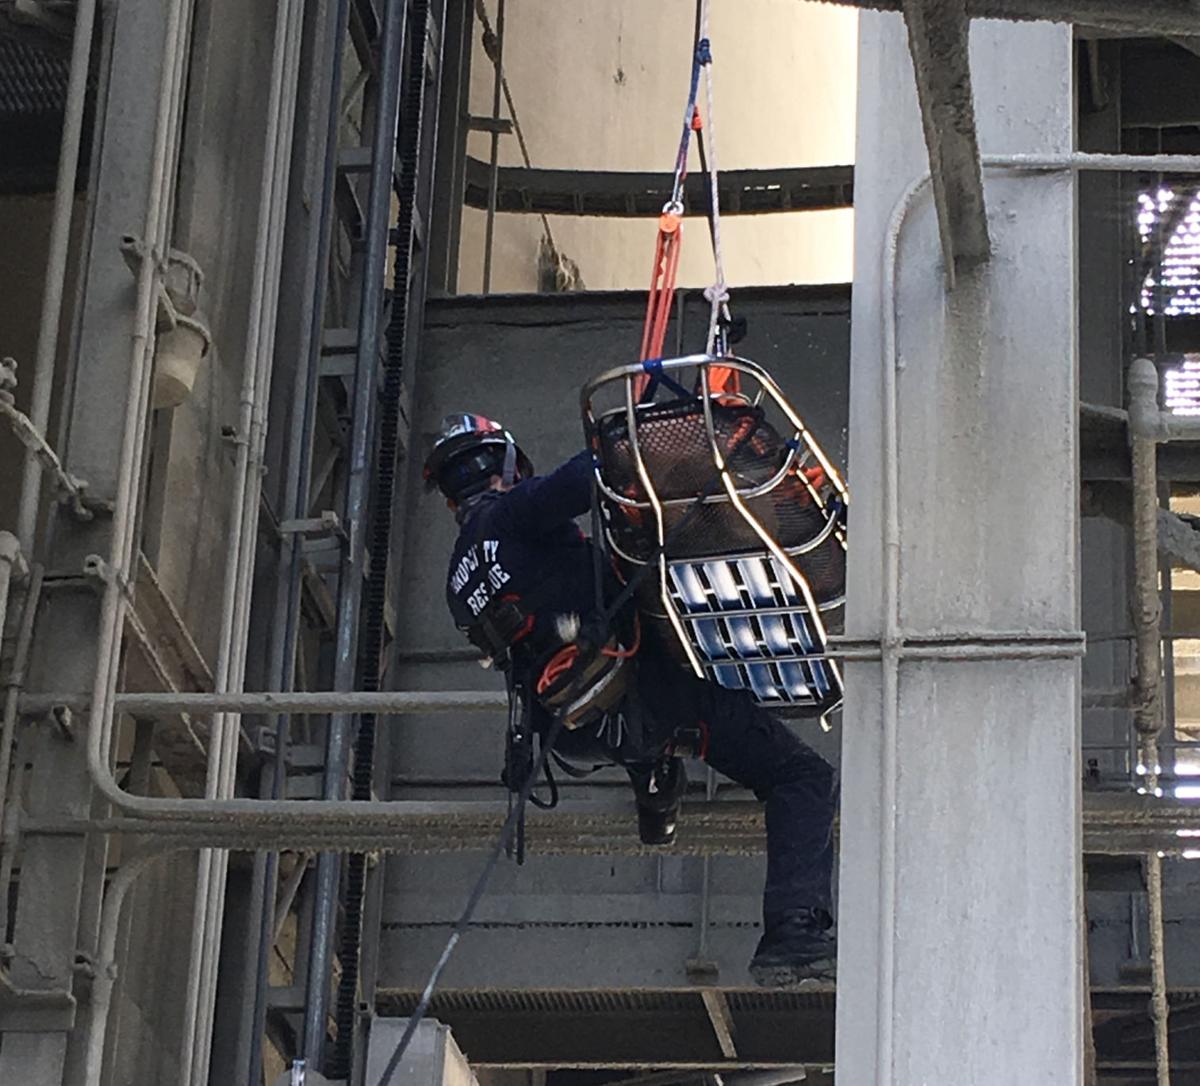 Area firefighters practice high rescues at Hernando cement plant | News